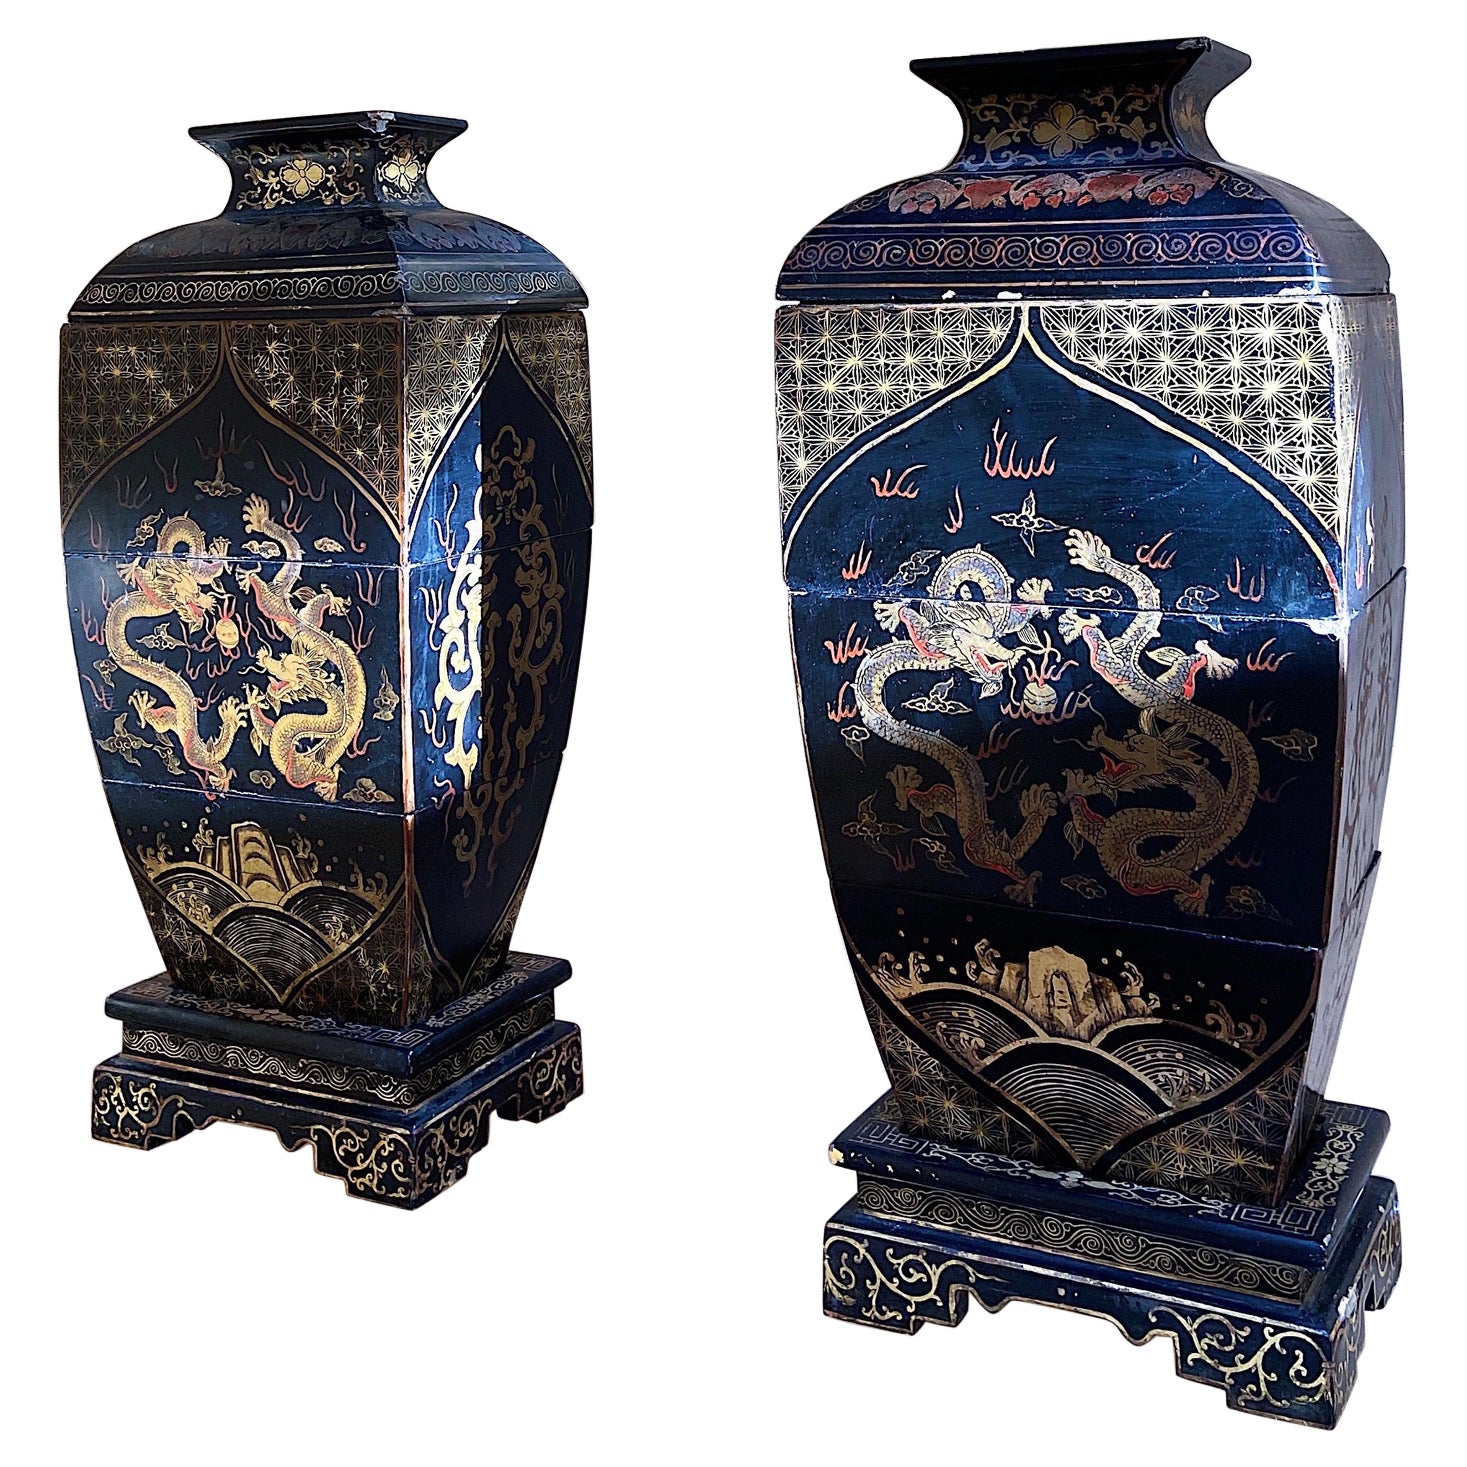 Pair of Chinese Republic Era Stacking Lacquered Box Set with Dragons, 1920s